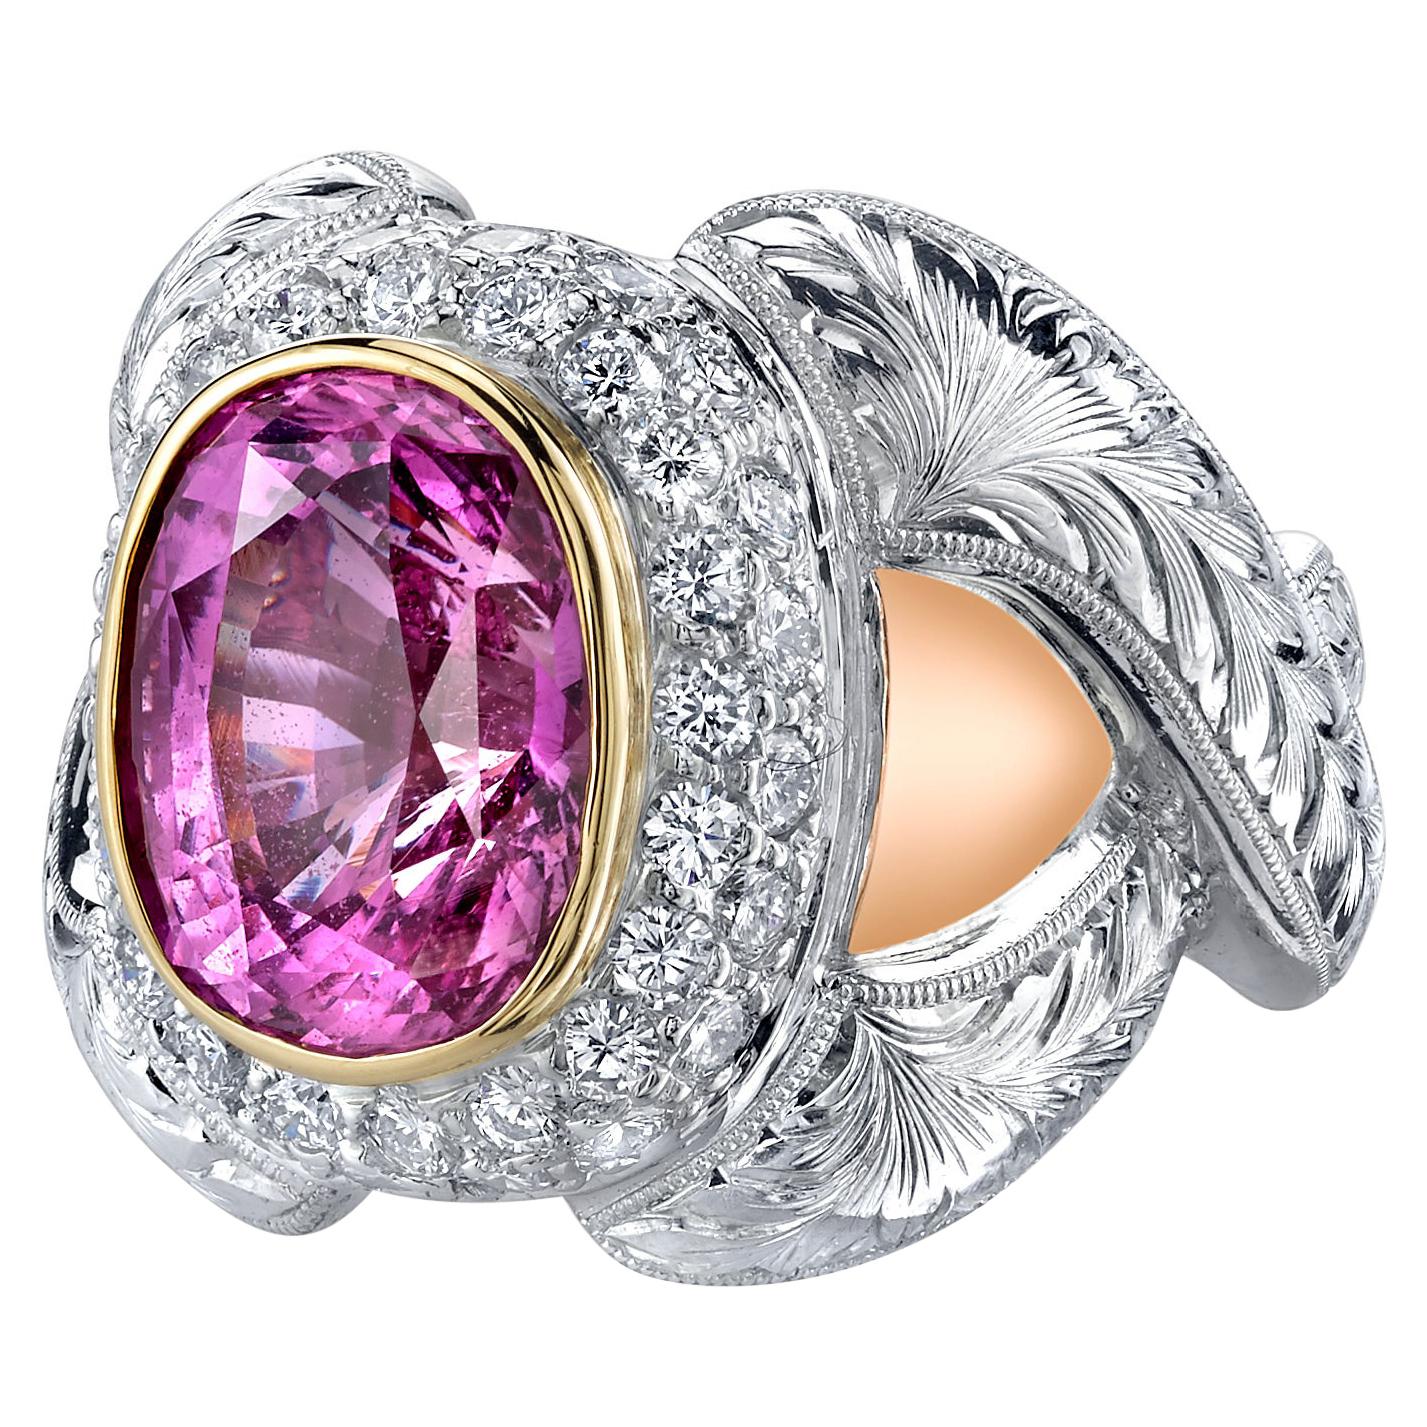 GIA Certified 7.08 Carat Pink Sapphire and Diamond Cocktail Ring in 18k Gold